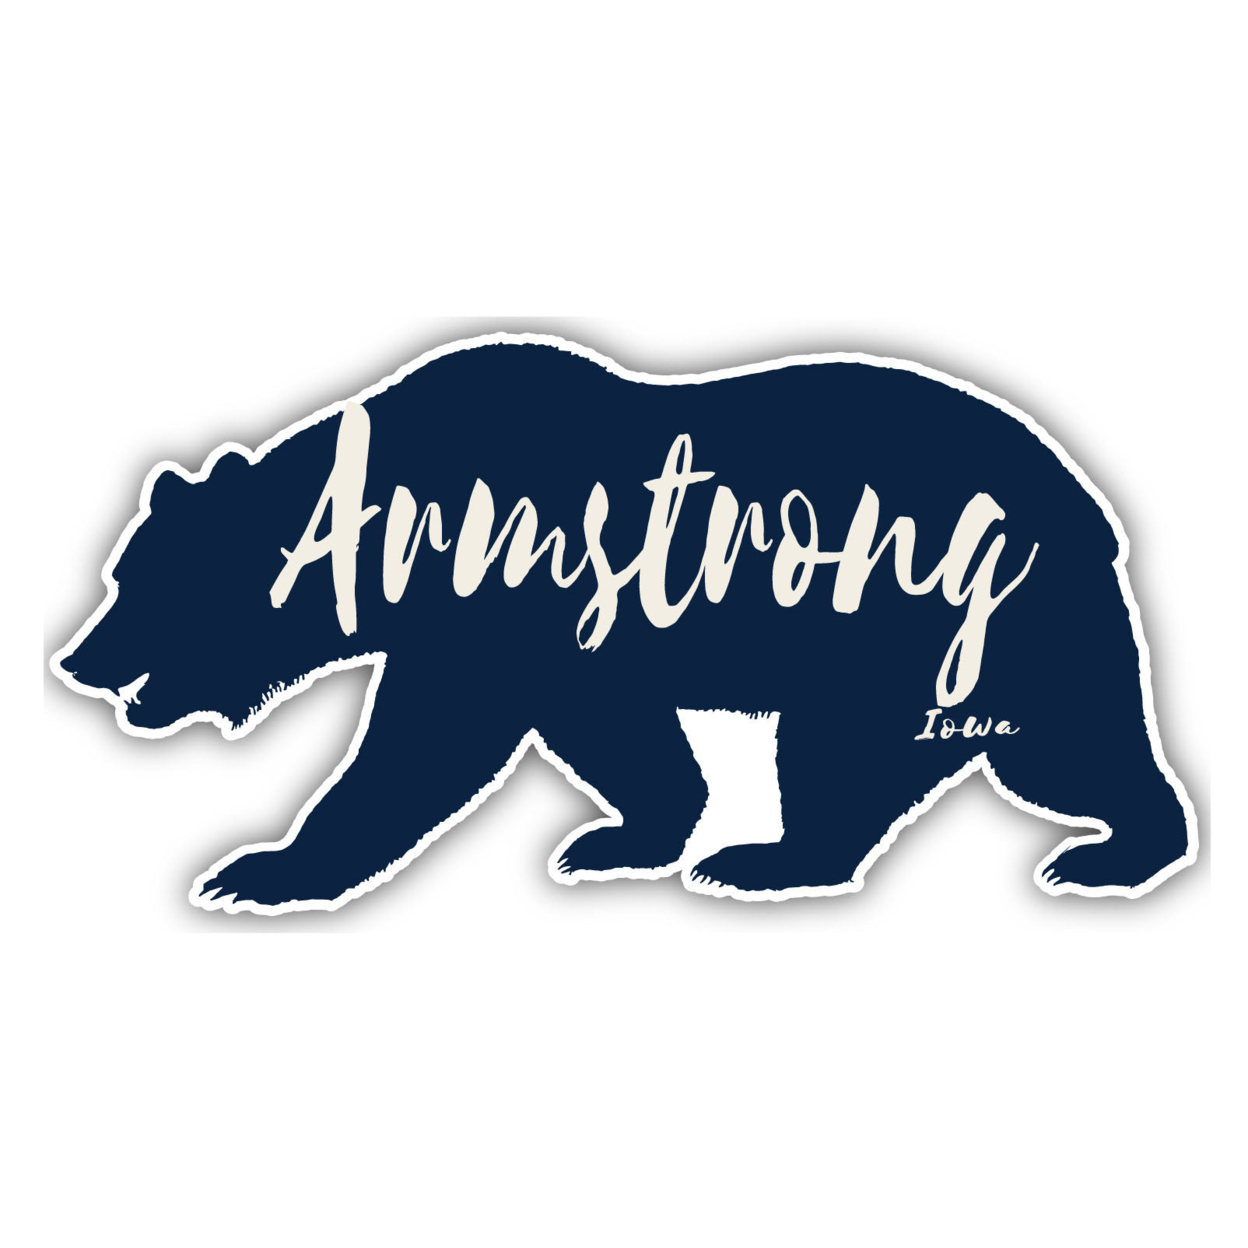 Armstrong Iowa Souvenir Decorative Stickers (Choose Theme And Size) - 4-Pack, 2-Inch, Bear